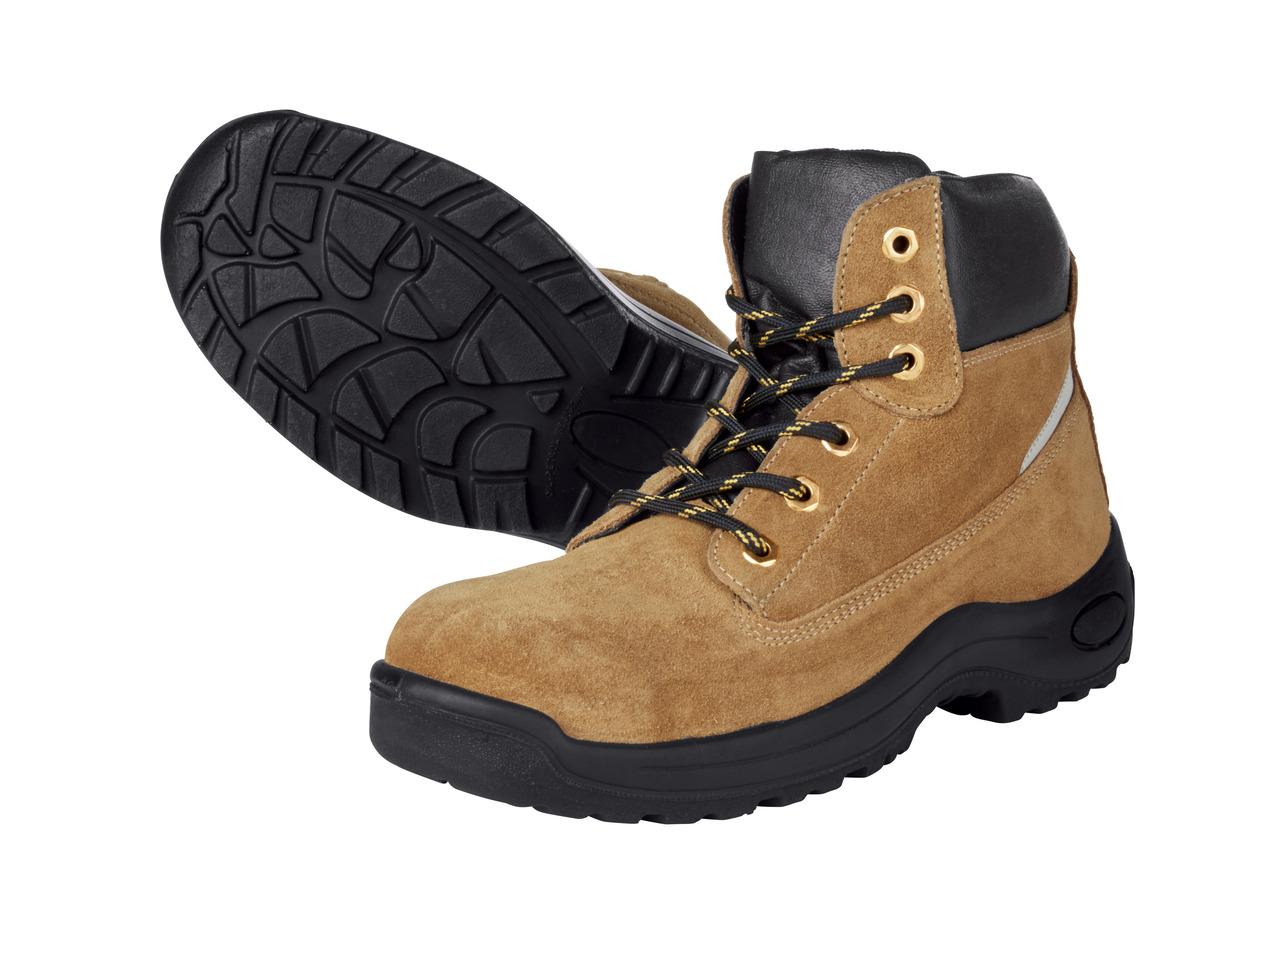 POWERFIX Leather Safety Boots/Shoes